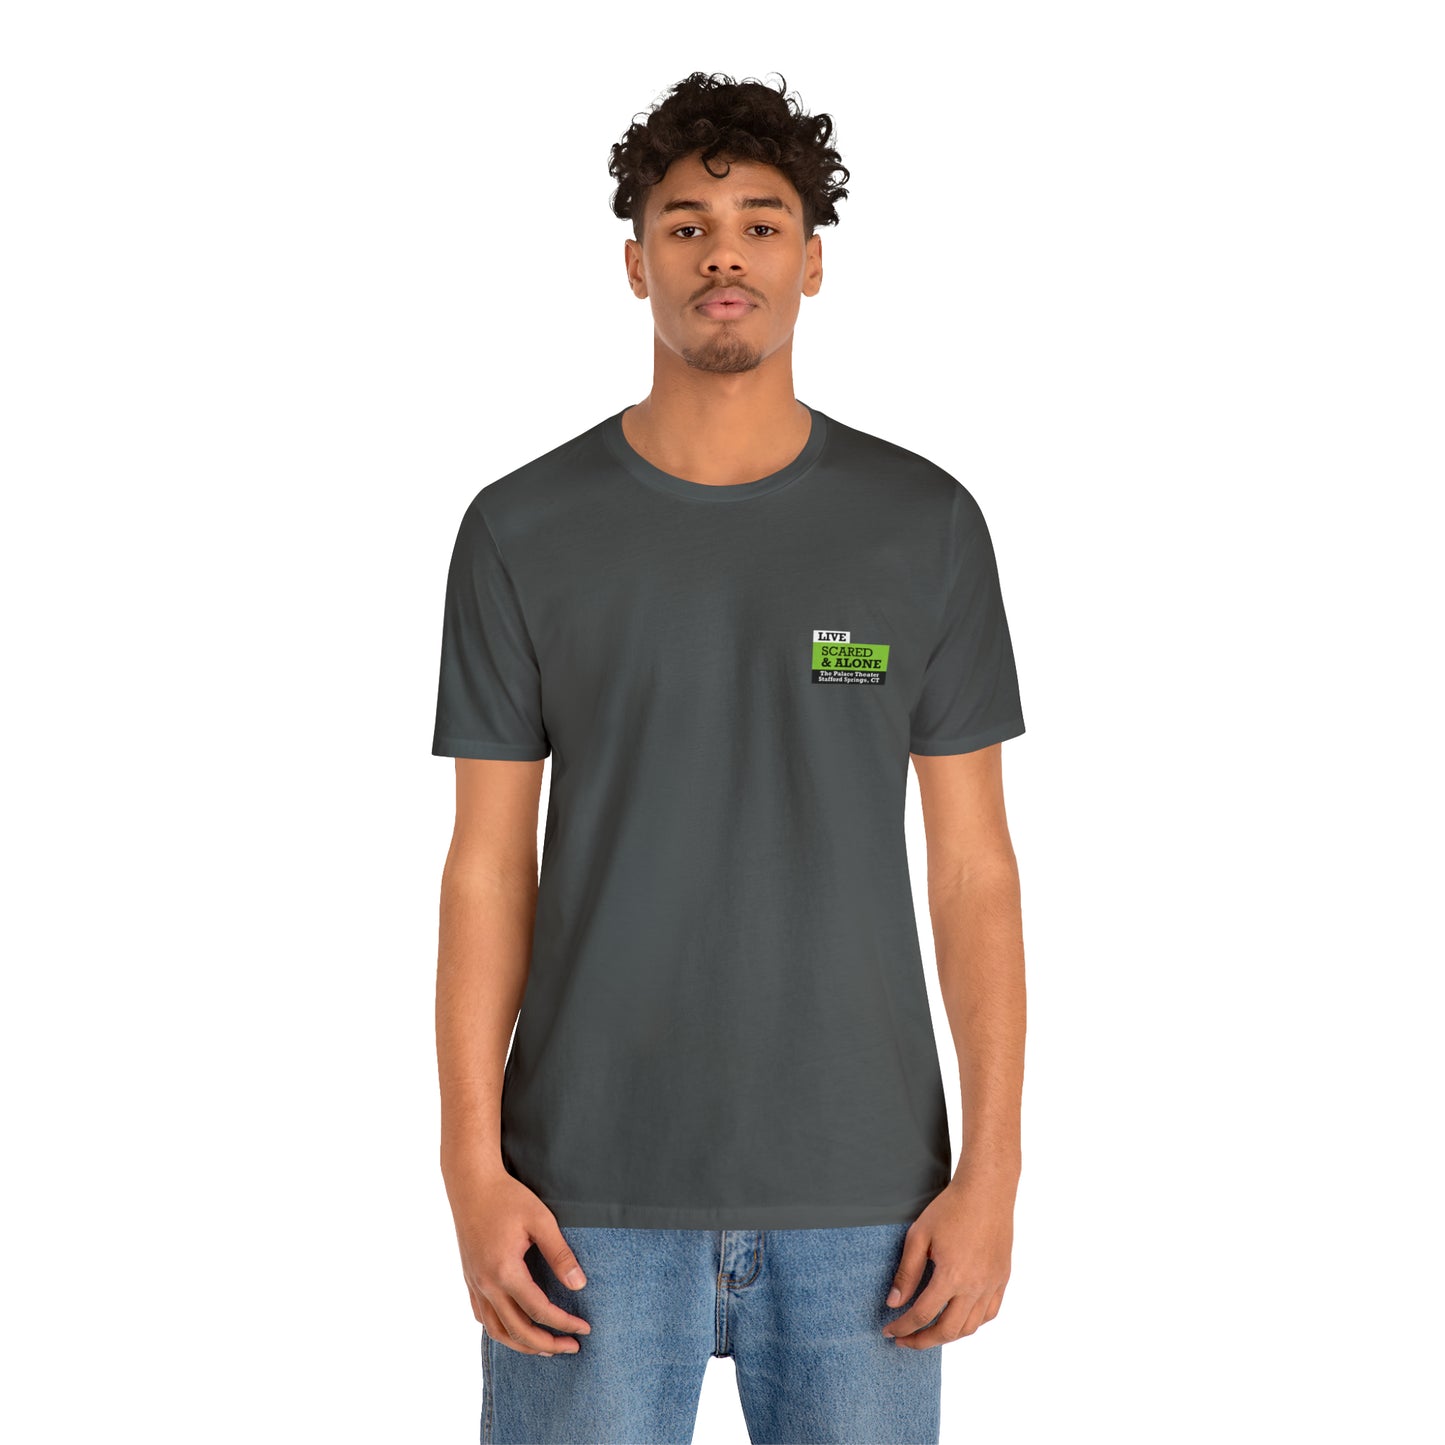 Scared & Alone Richard-Lael's "The Palace Theater" Unisex Gallery Tee